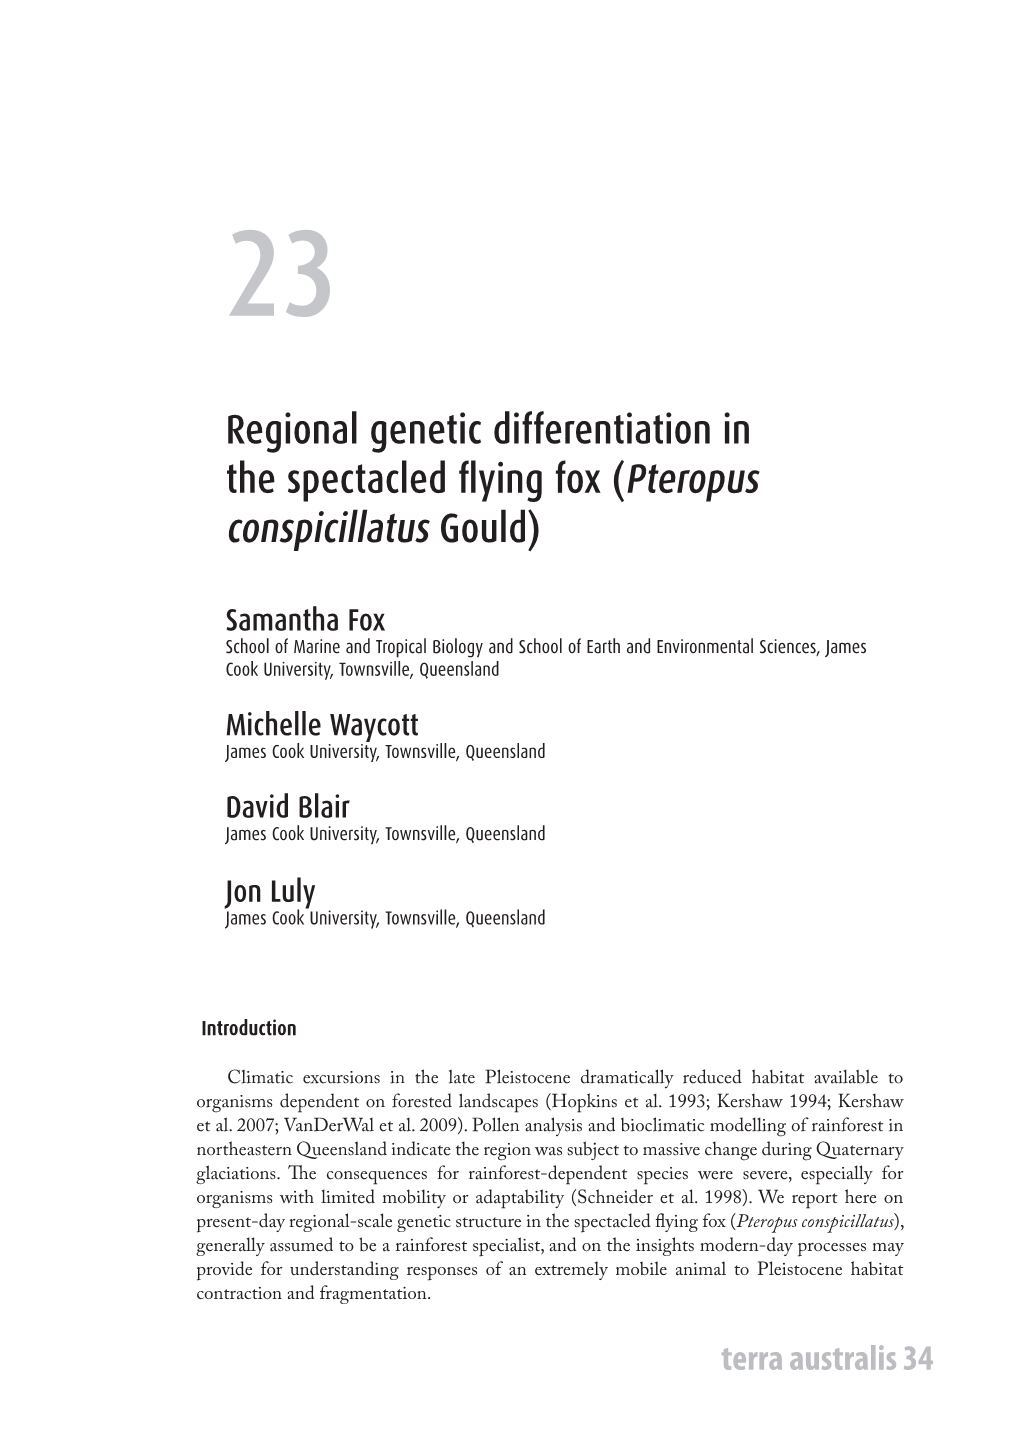 Regional Genetic Differentiation in the Spectacled Flying Fox (Pteropus Conspicillatus Gould)